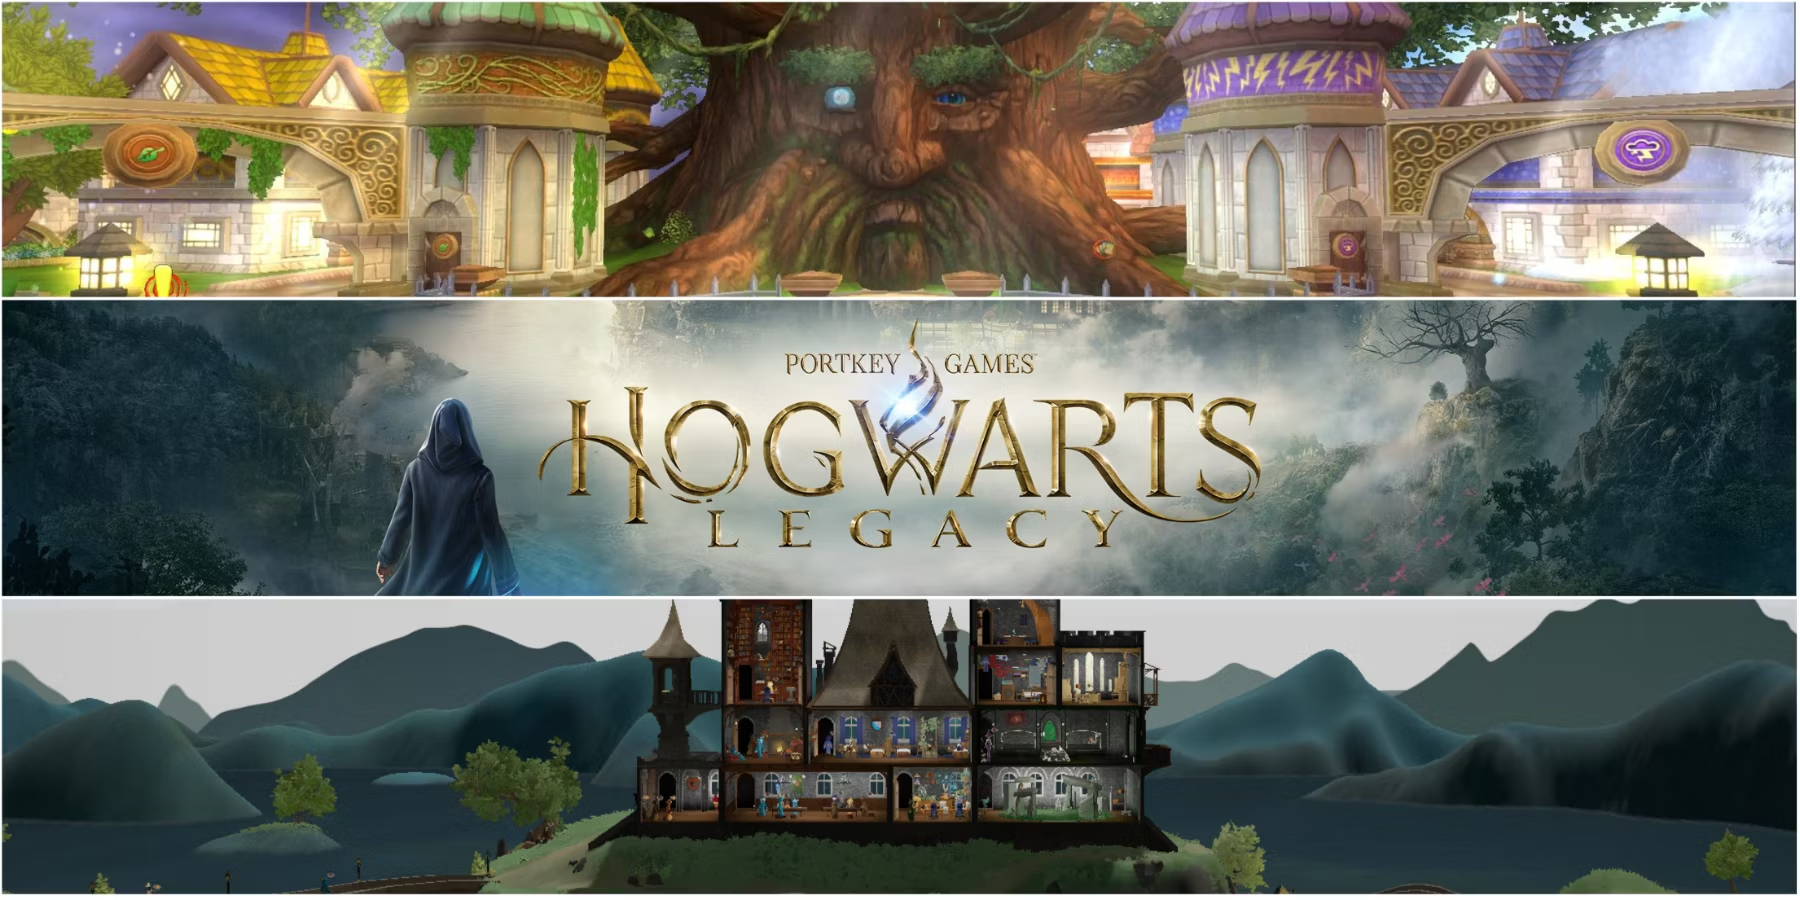 Hogwarts Legacy Nearly Matches Elden Ring and New World on Steam